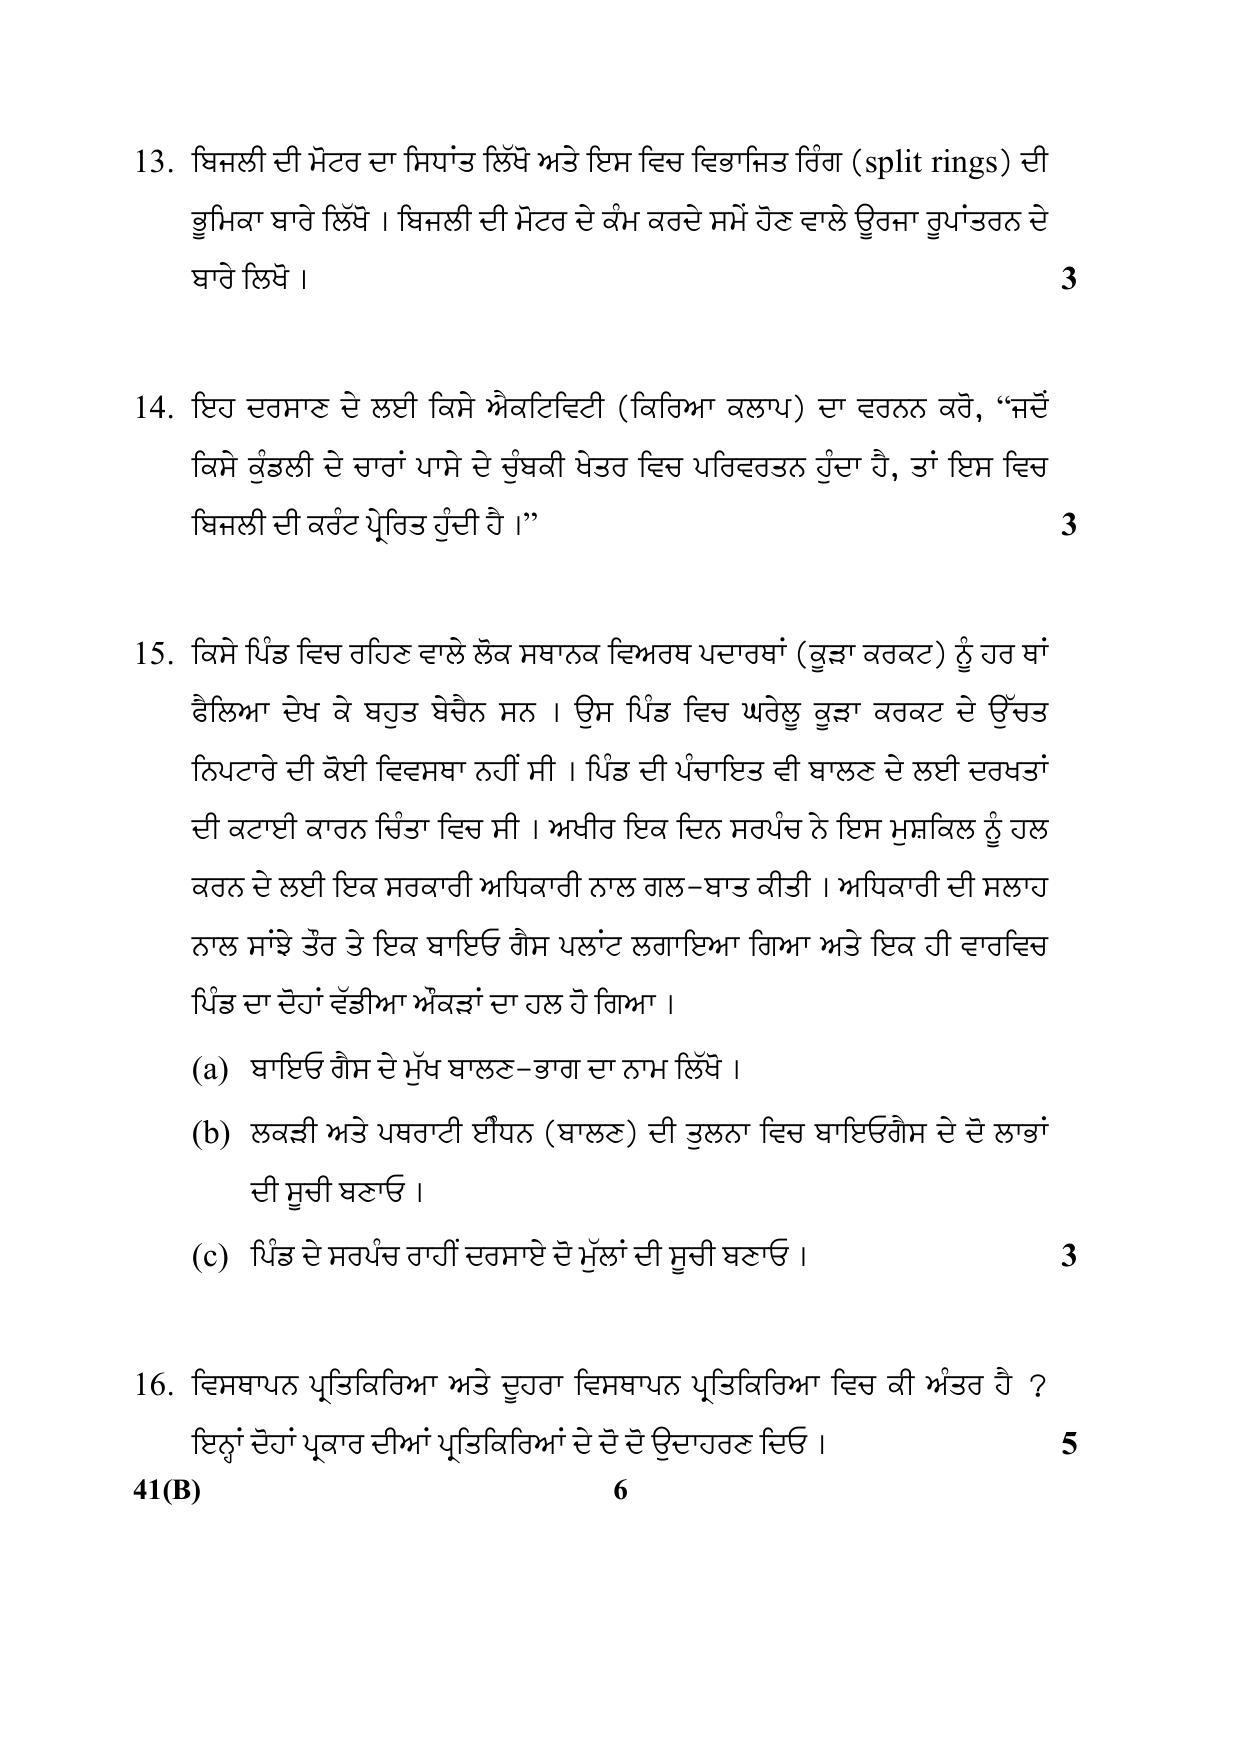 CBSE Class 10 41(B) (Science) For Blind_Punjabi 2018 Question Paper - Page 6